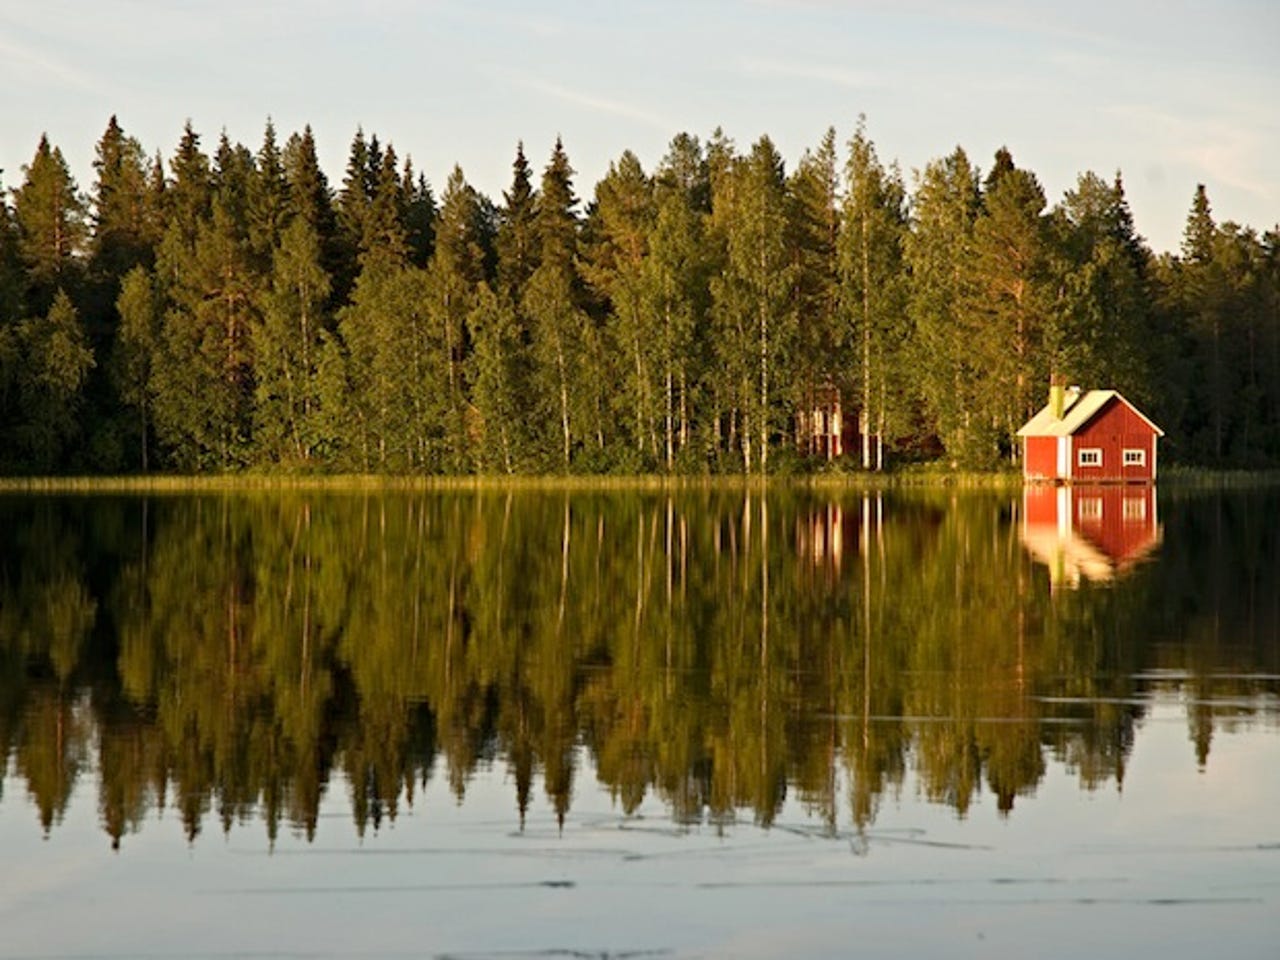 Summer house in Lapland